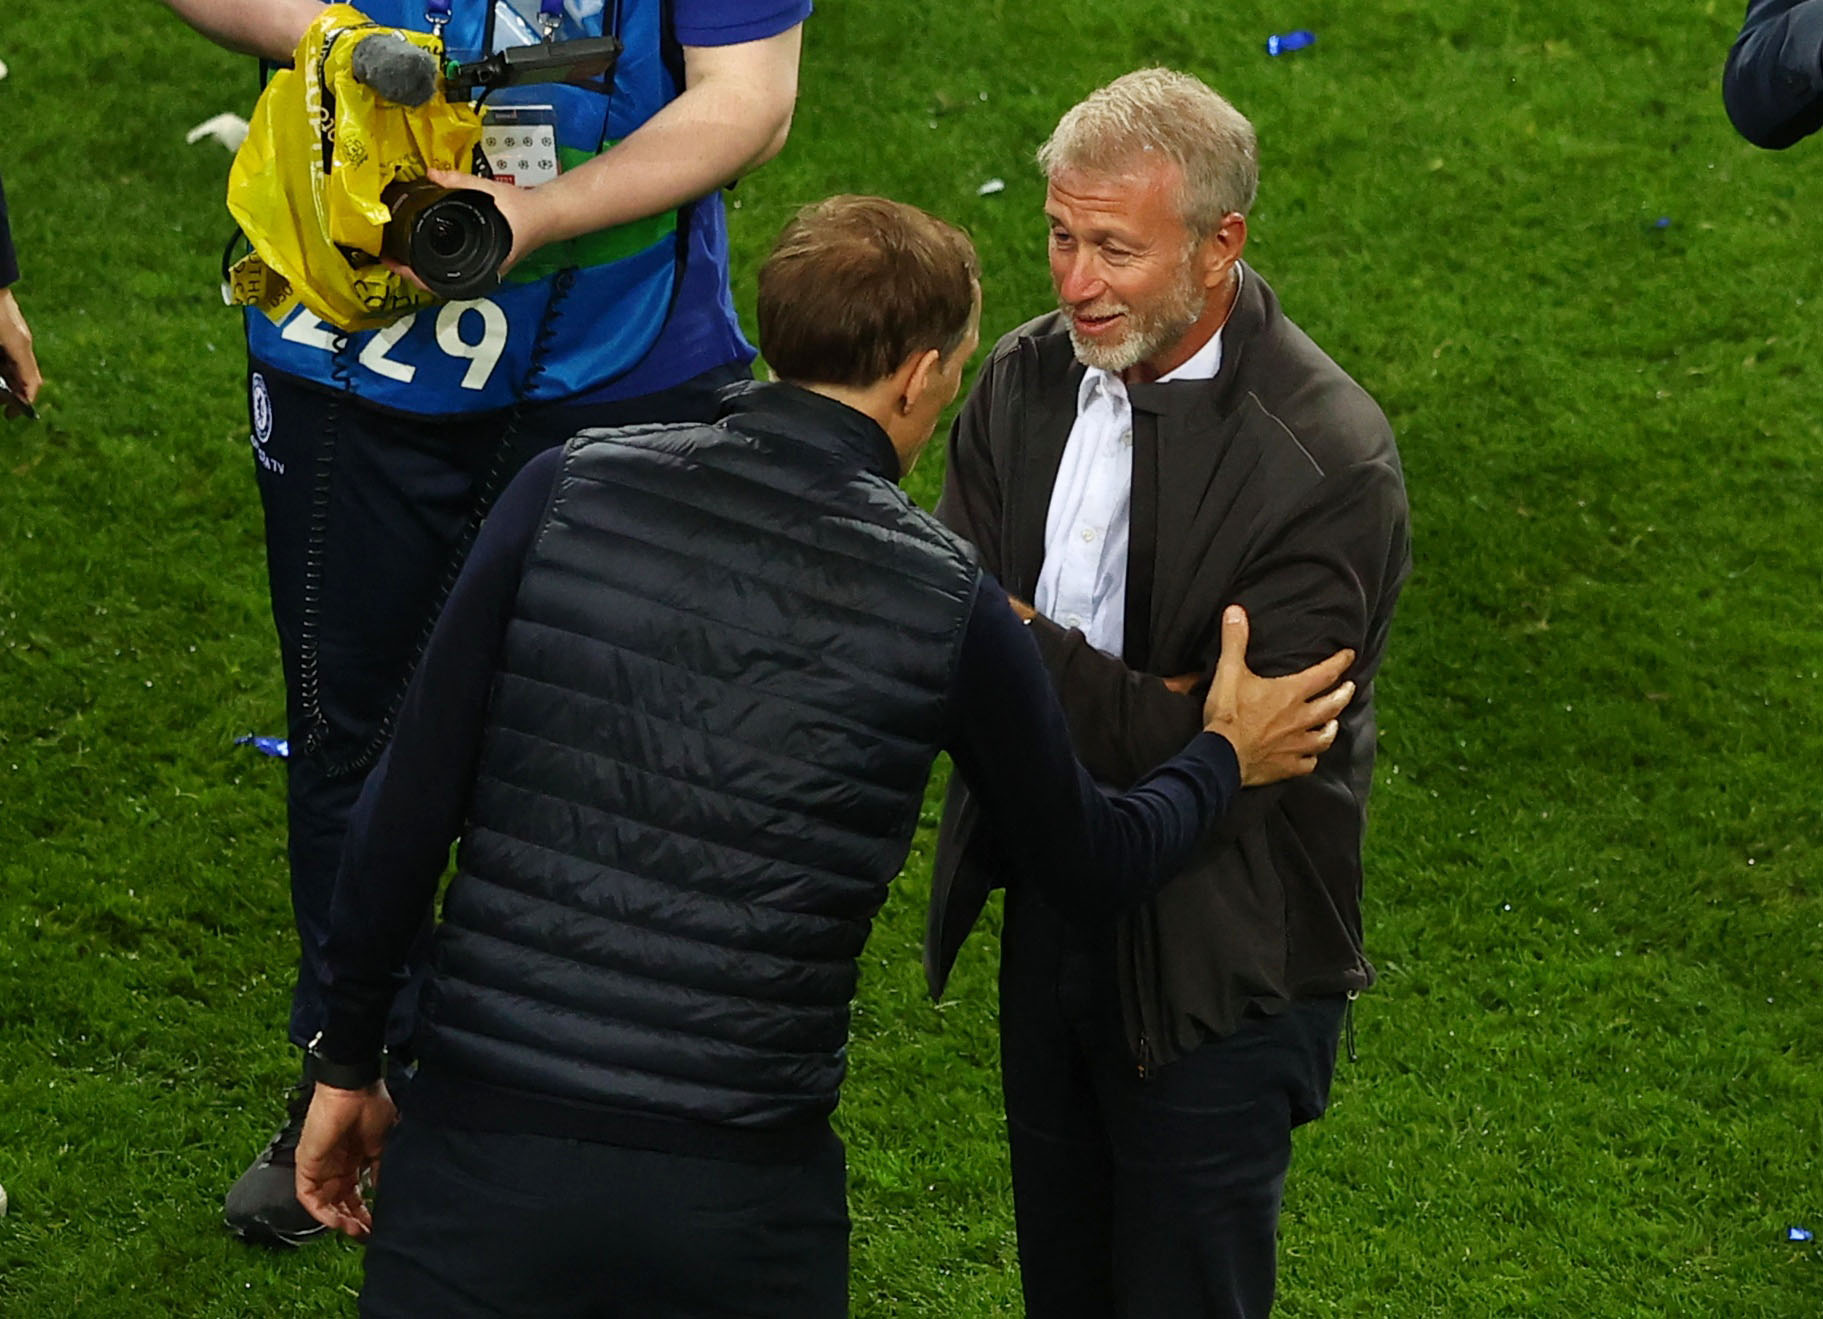 Soccer Football - Champions League Final - Manchester City v Chelsea - Estadio do Dragao, Porto, Portugal - May 29, 2021 Chelsea manager Thomas Tuchel celebrates with owner Roman Abramovich after winning the Champions League Pool via REUTERS/Michael Steele